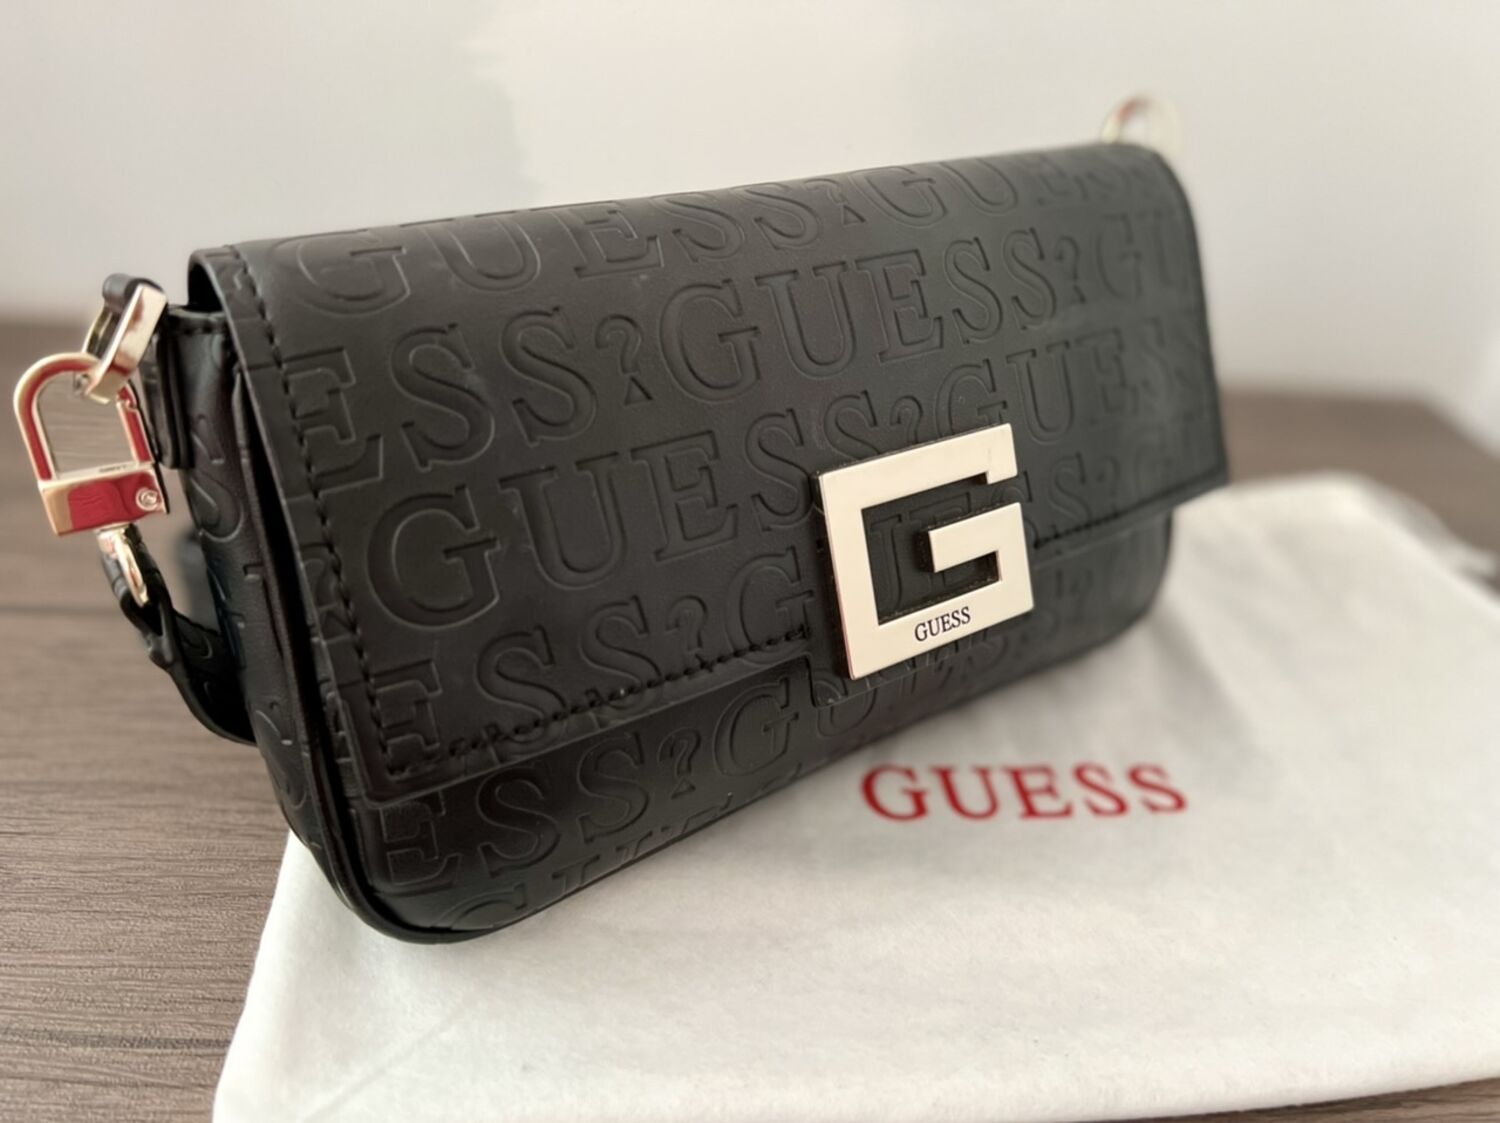 Guess | Bags | Guess Purse Handbag With Top Handle And Side Strap | Poshmark